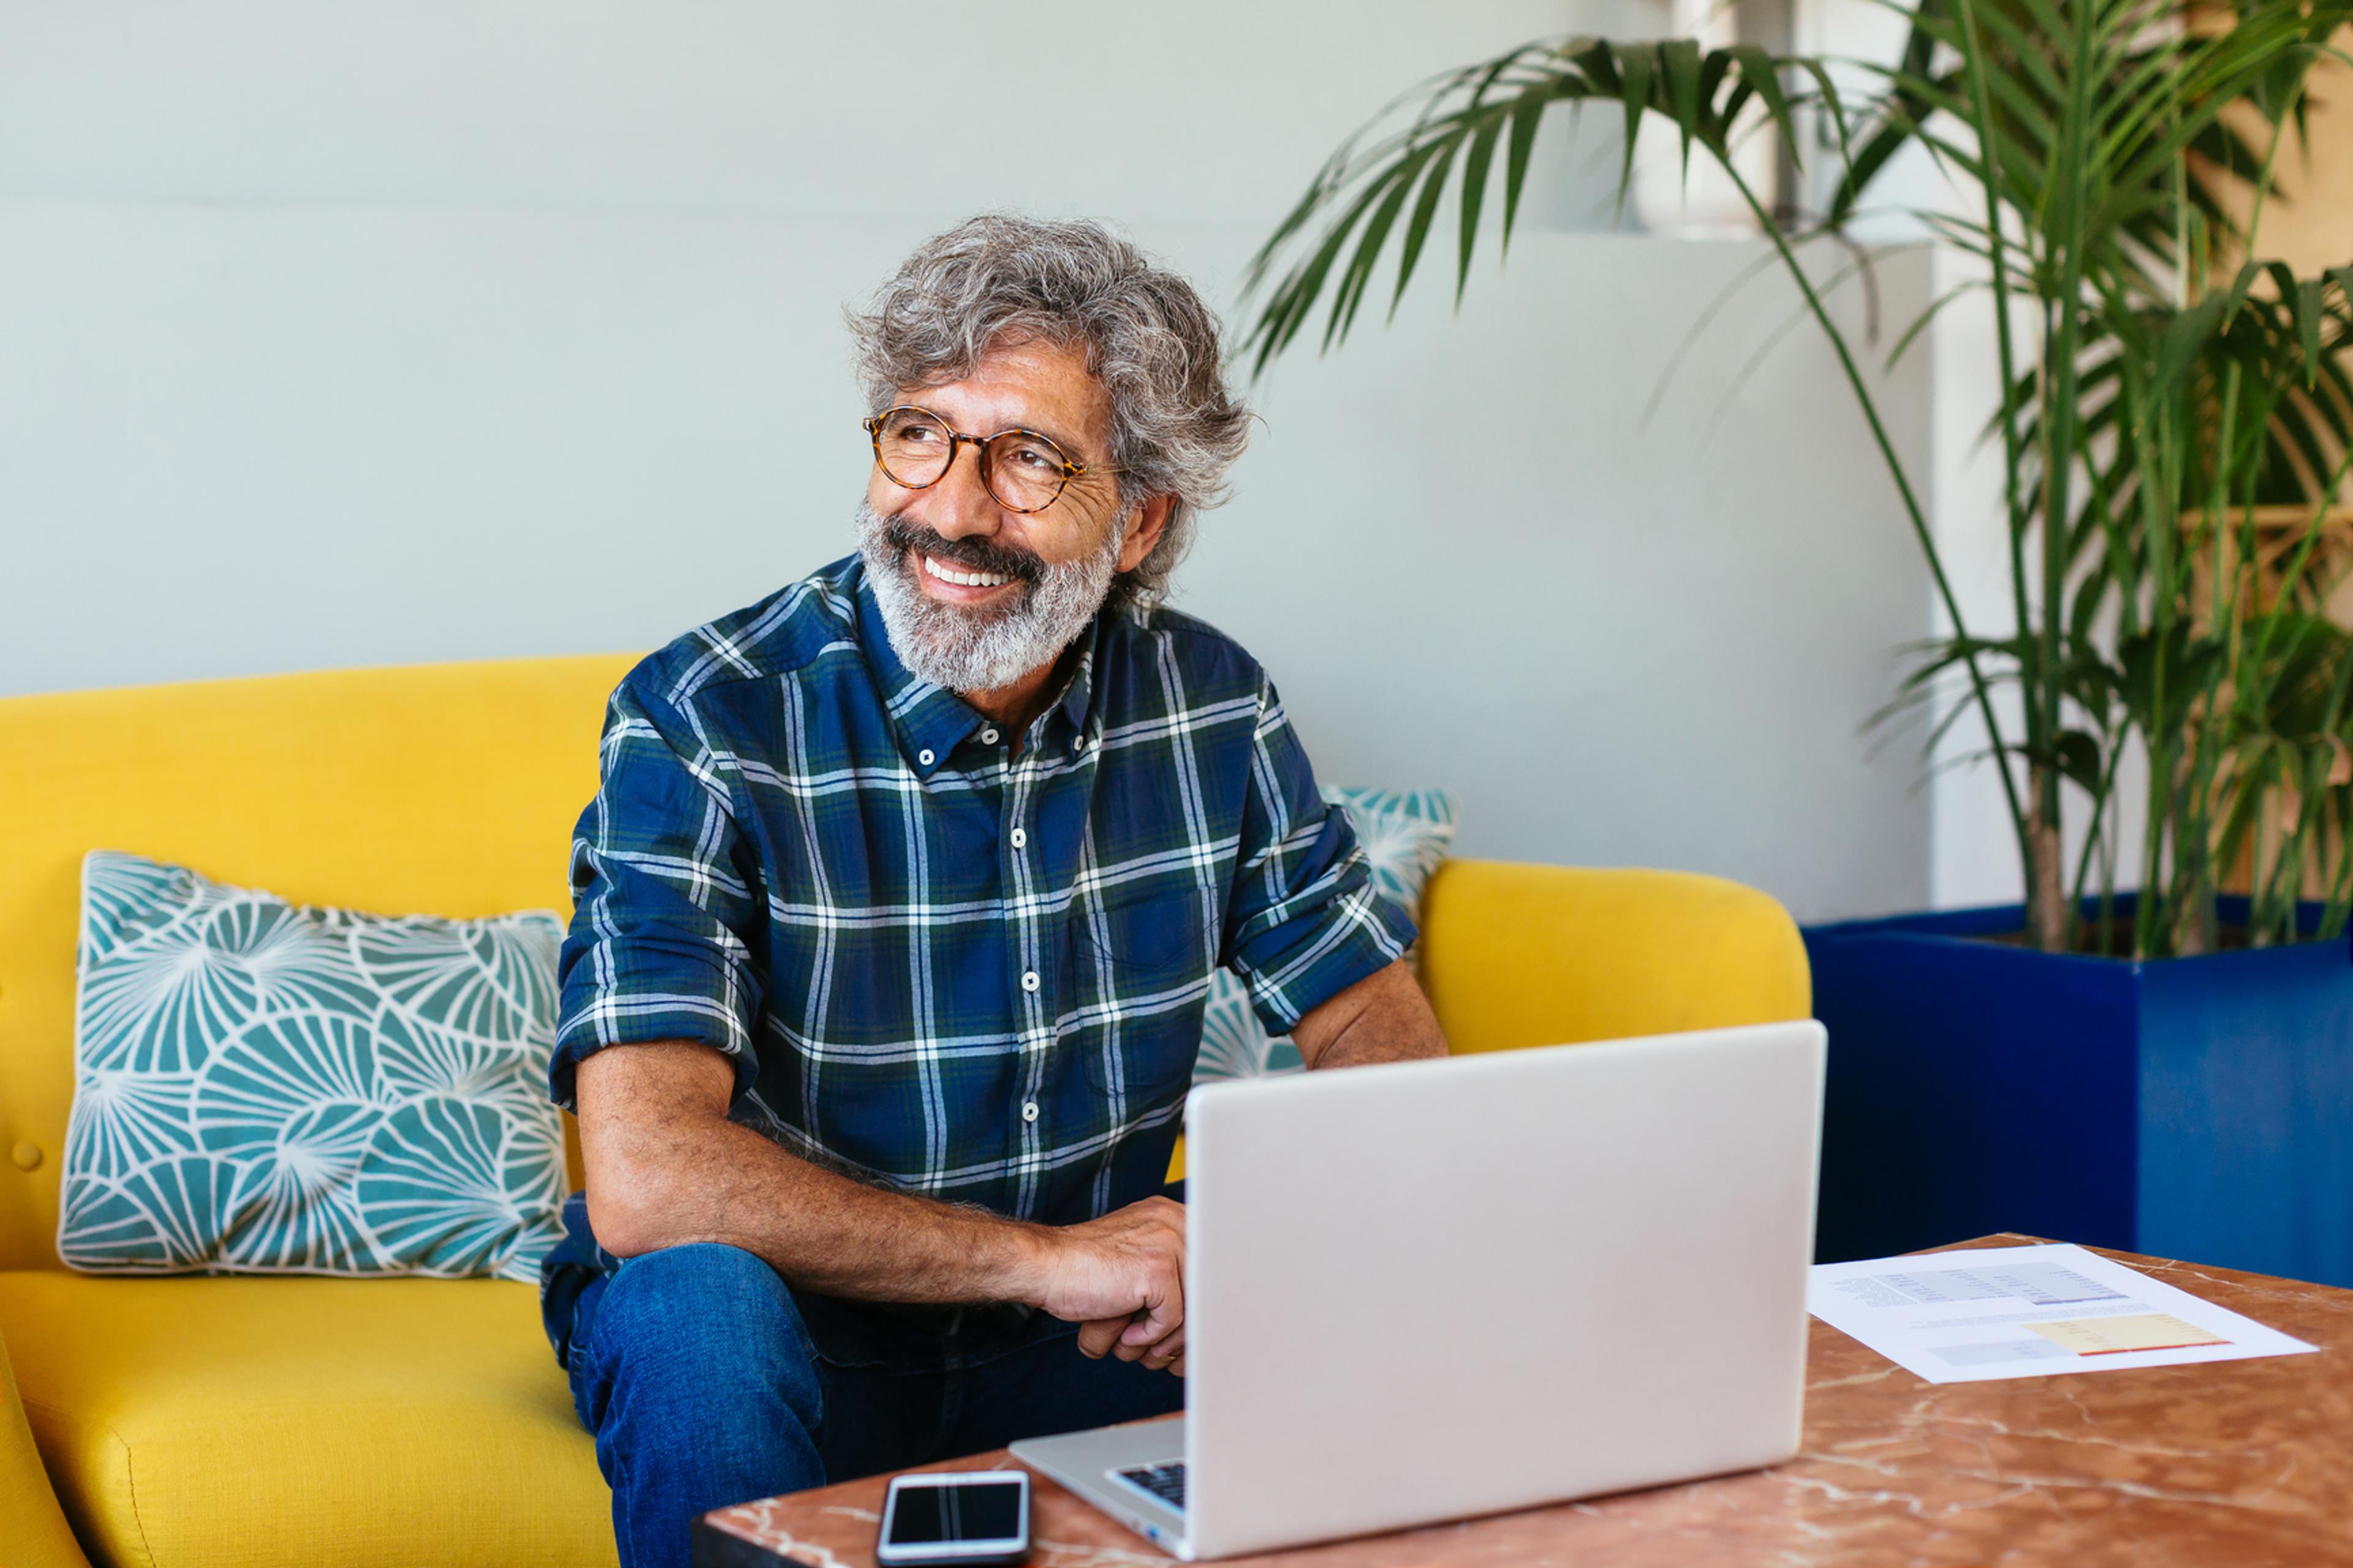 A photo of a man sat down in front of a laptop and smiling